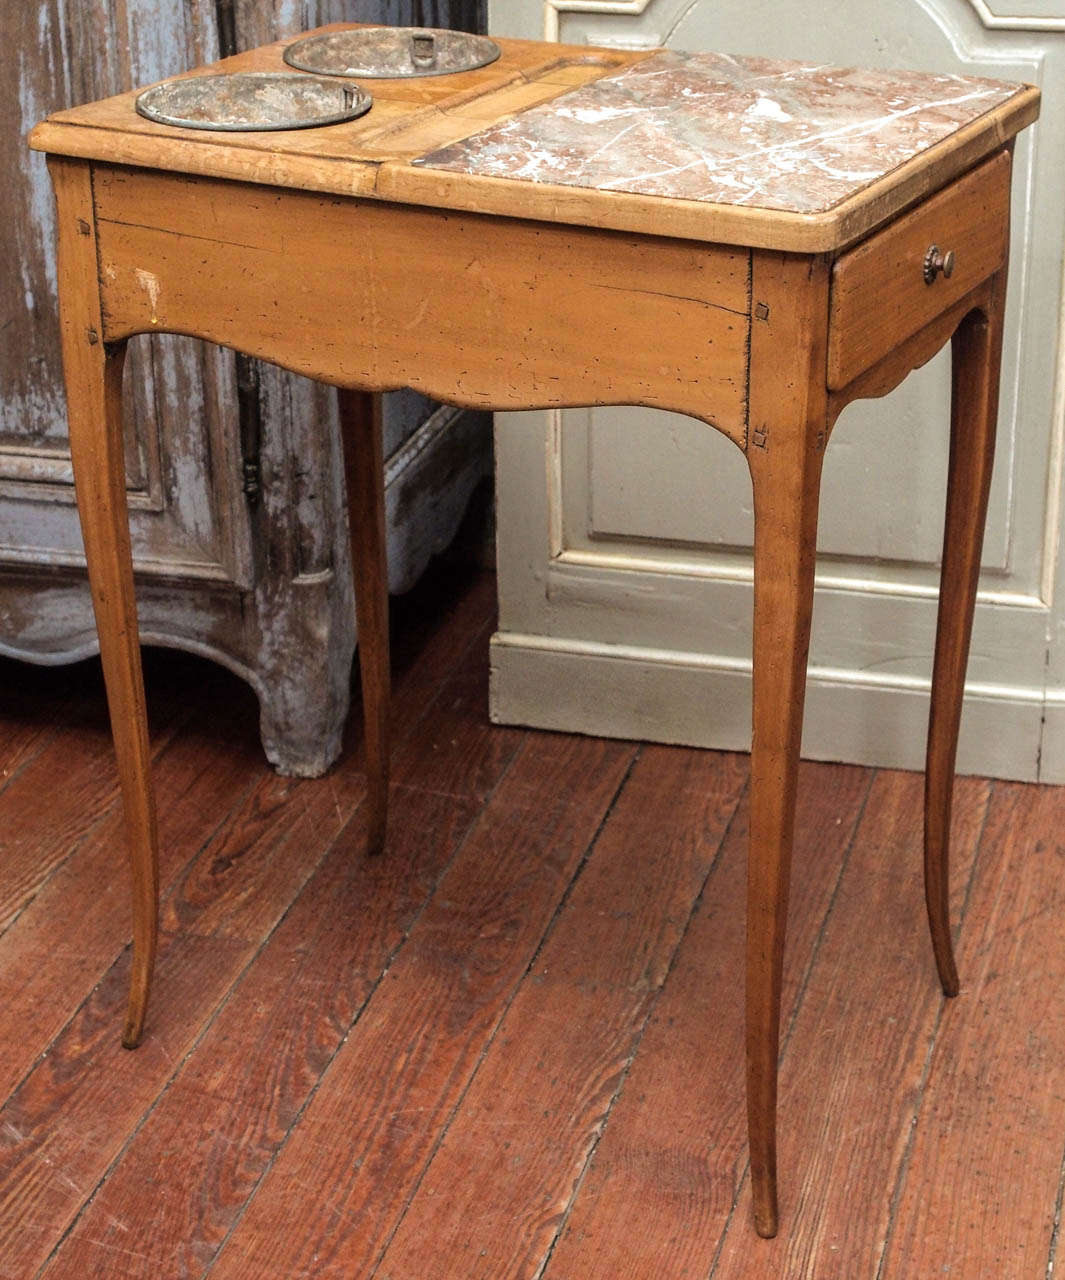 19th century walnut refraishisoir with two zinc buckets for wine and marble for the cheese and with a small drawer. It has lovely graceful legs.